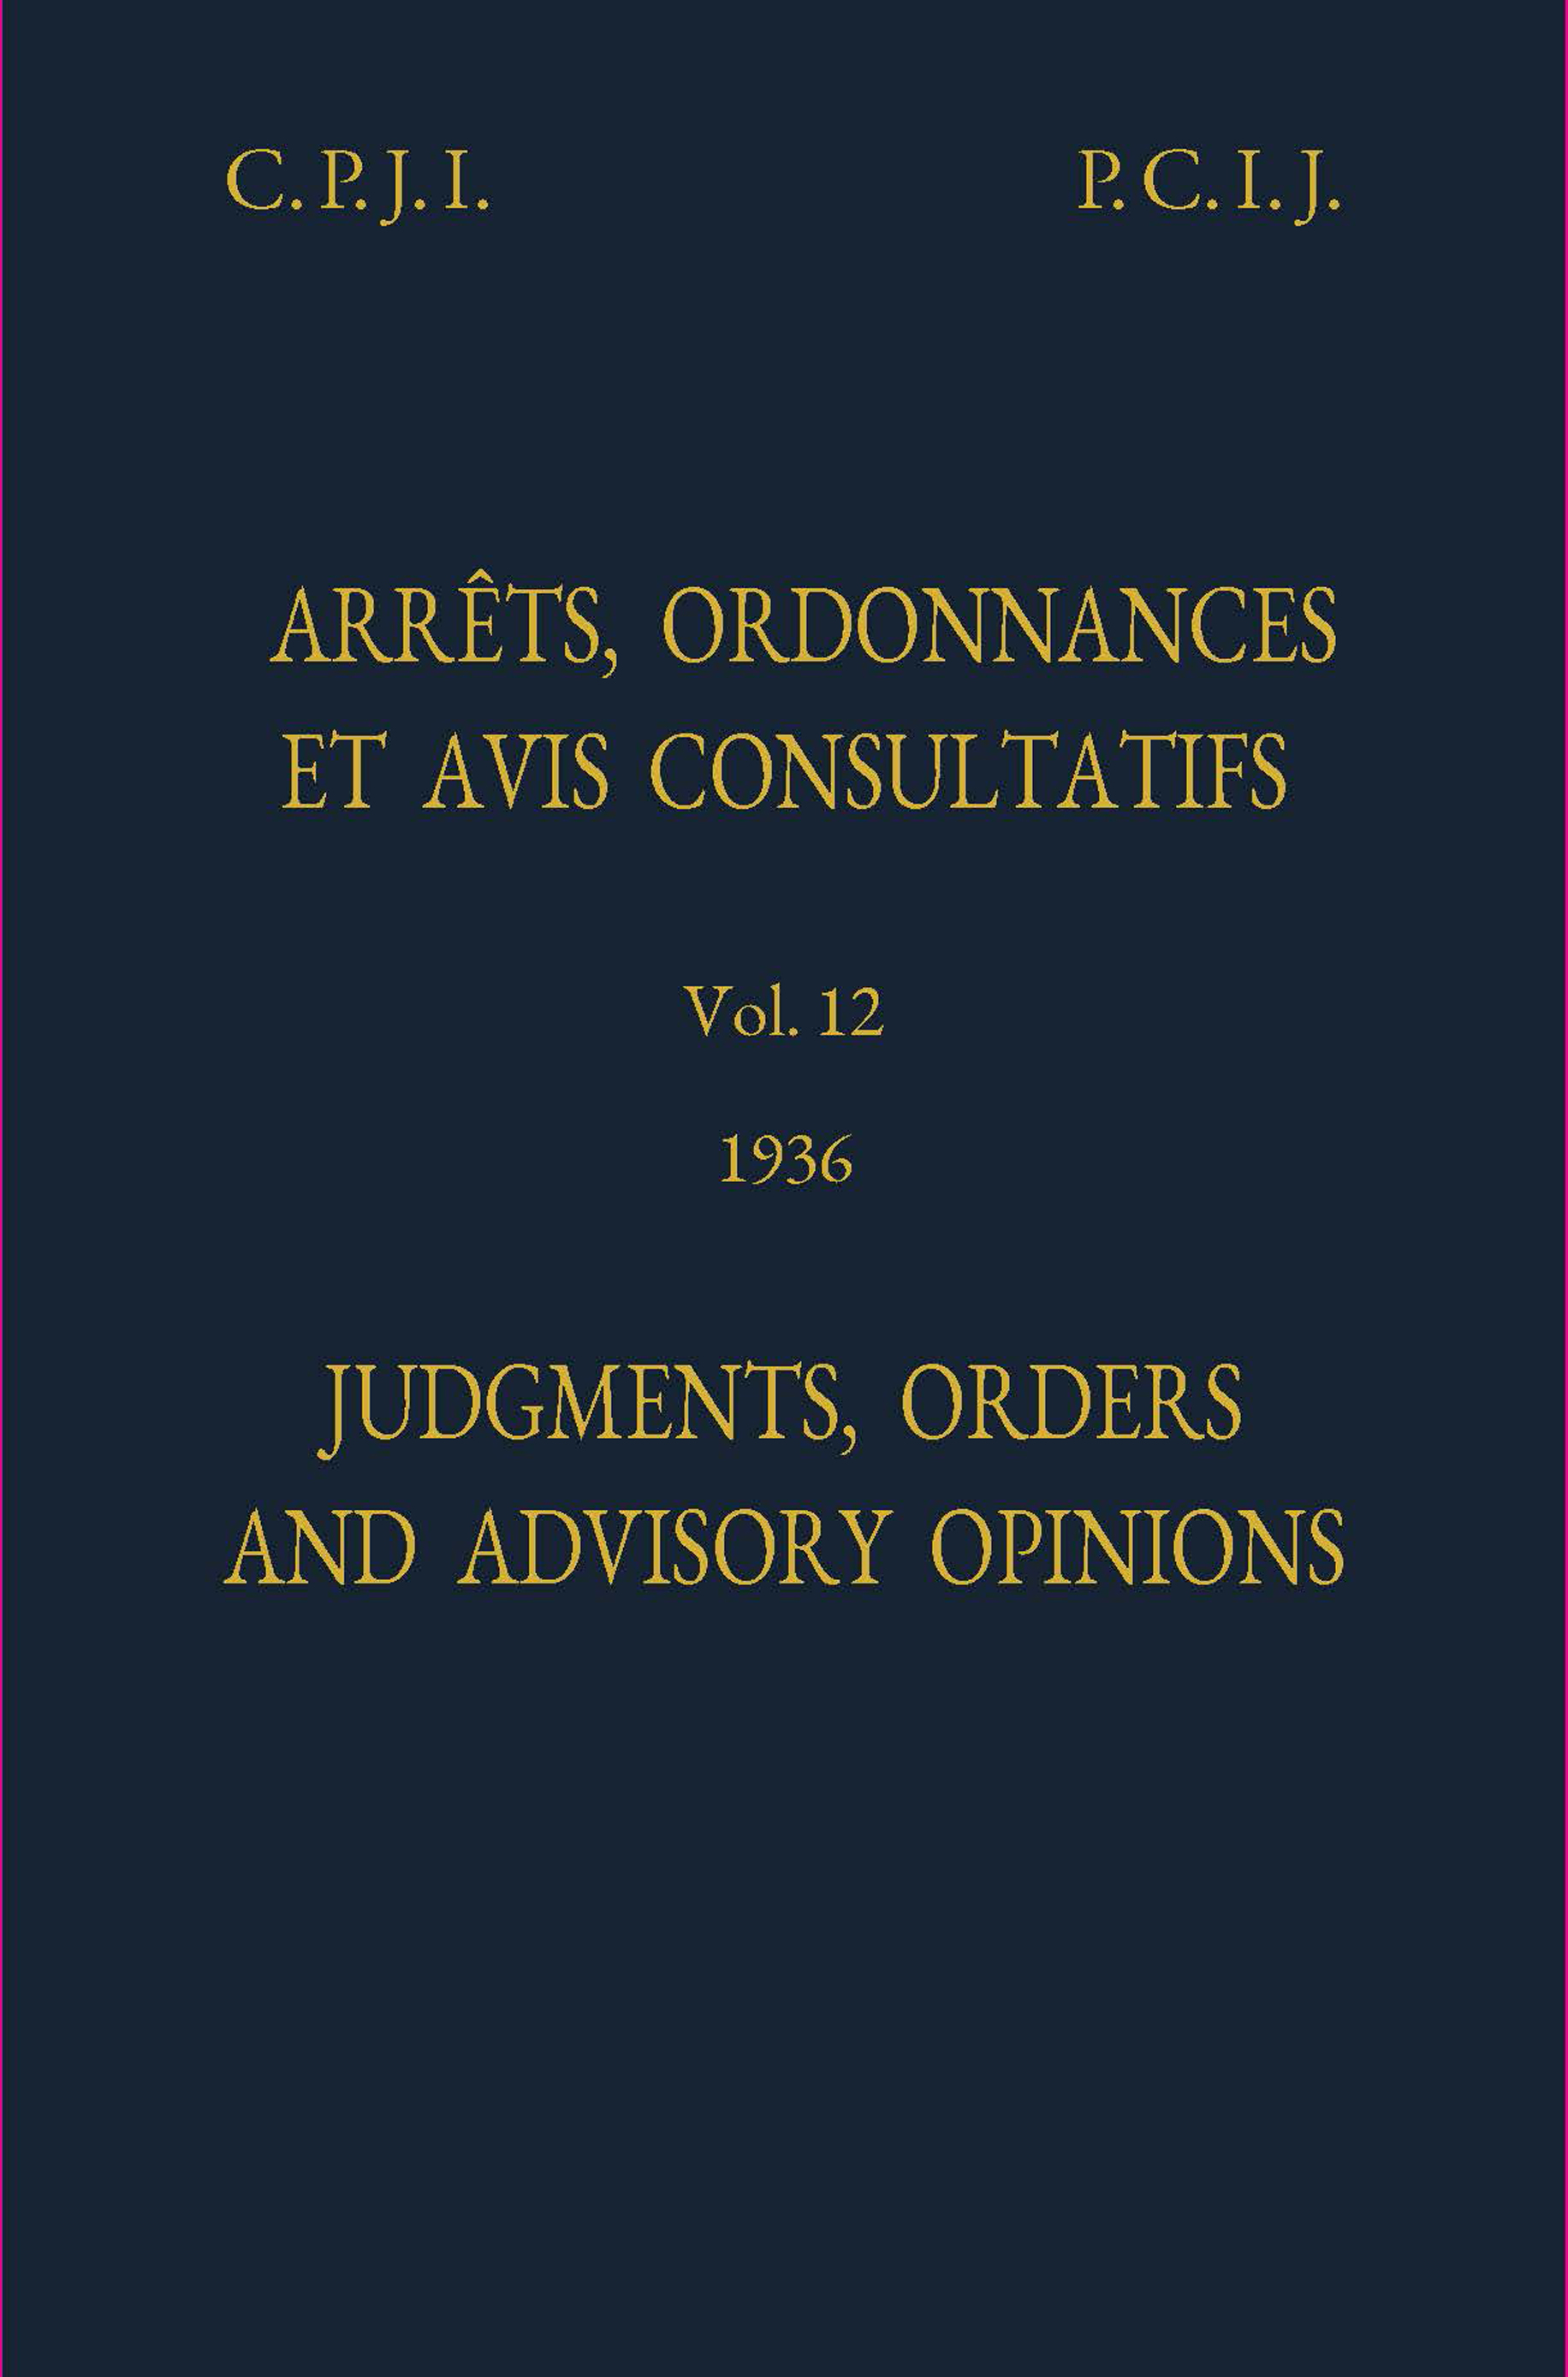 image of Judgments, Orders and Advisory Opinions: Vol. 12, 1936